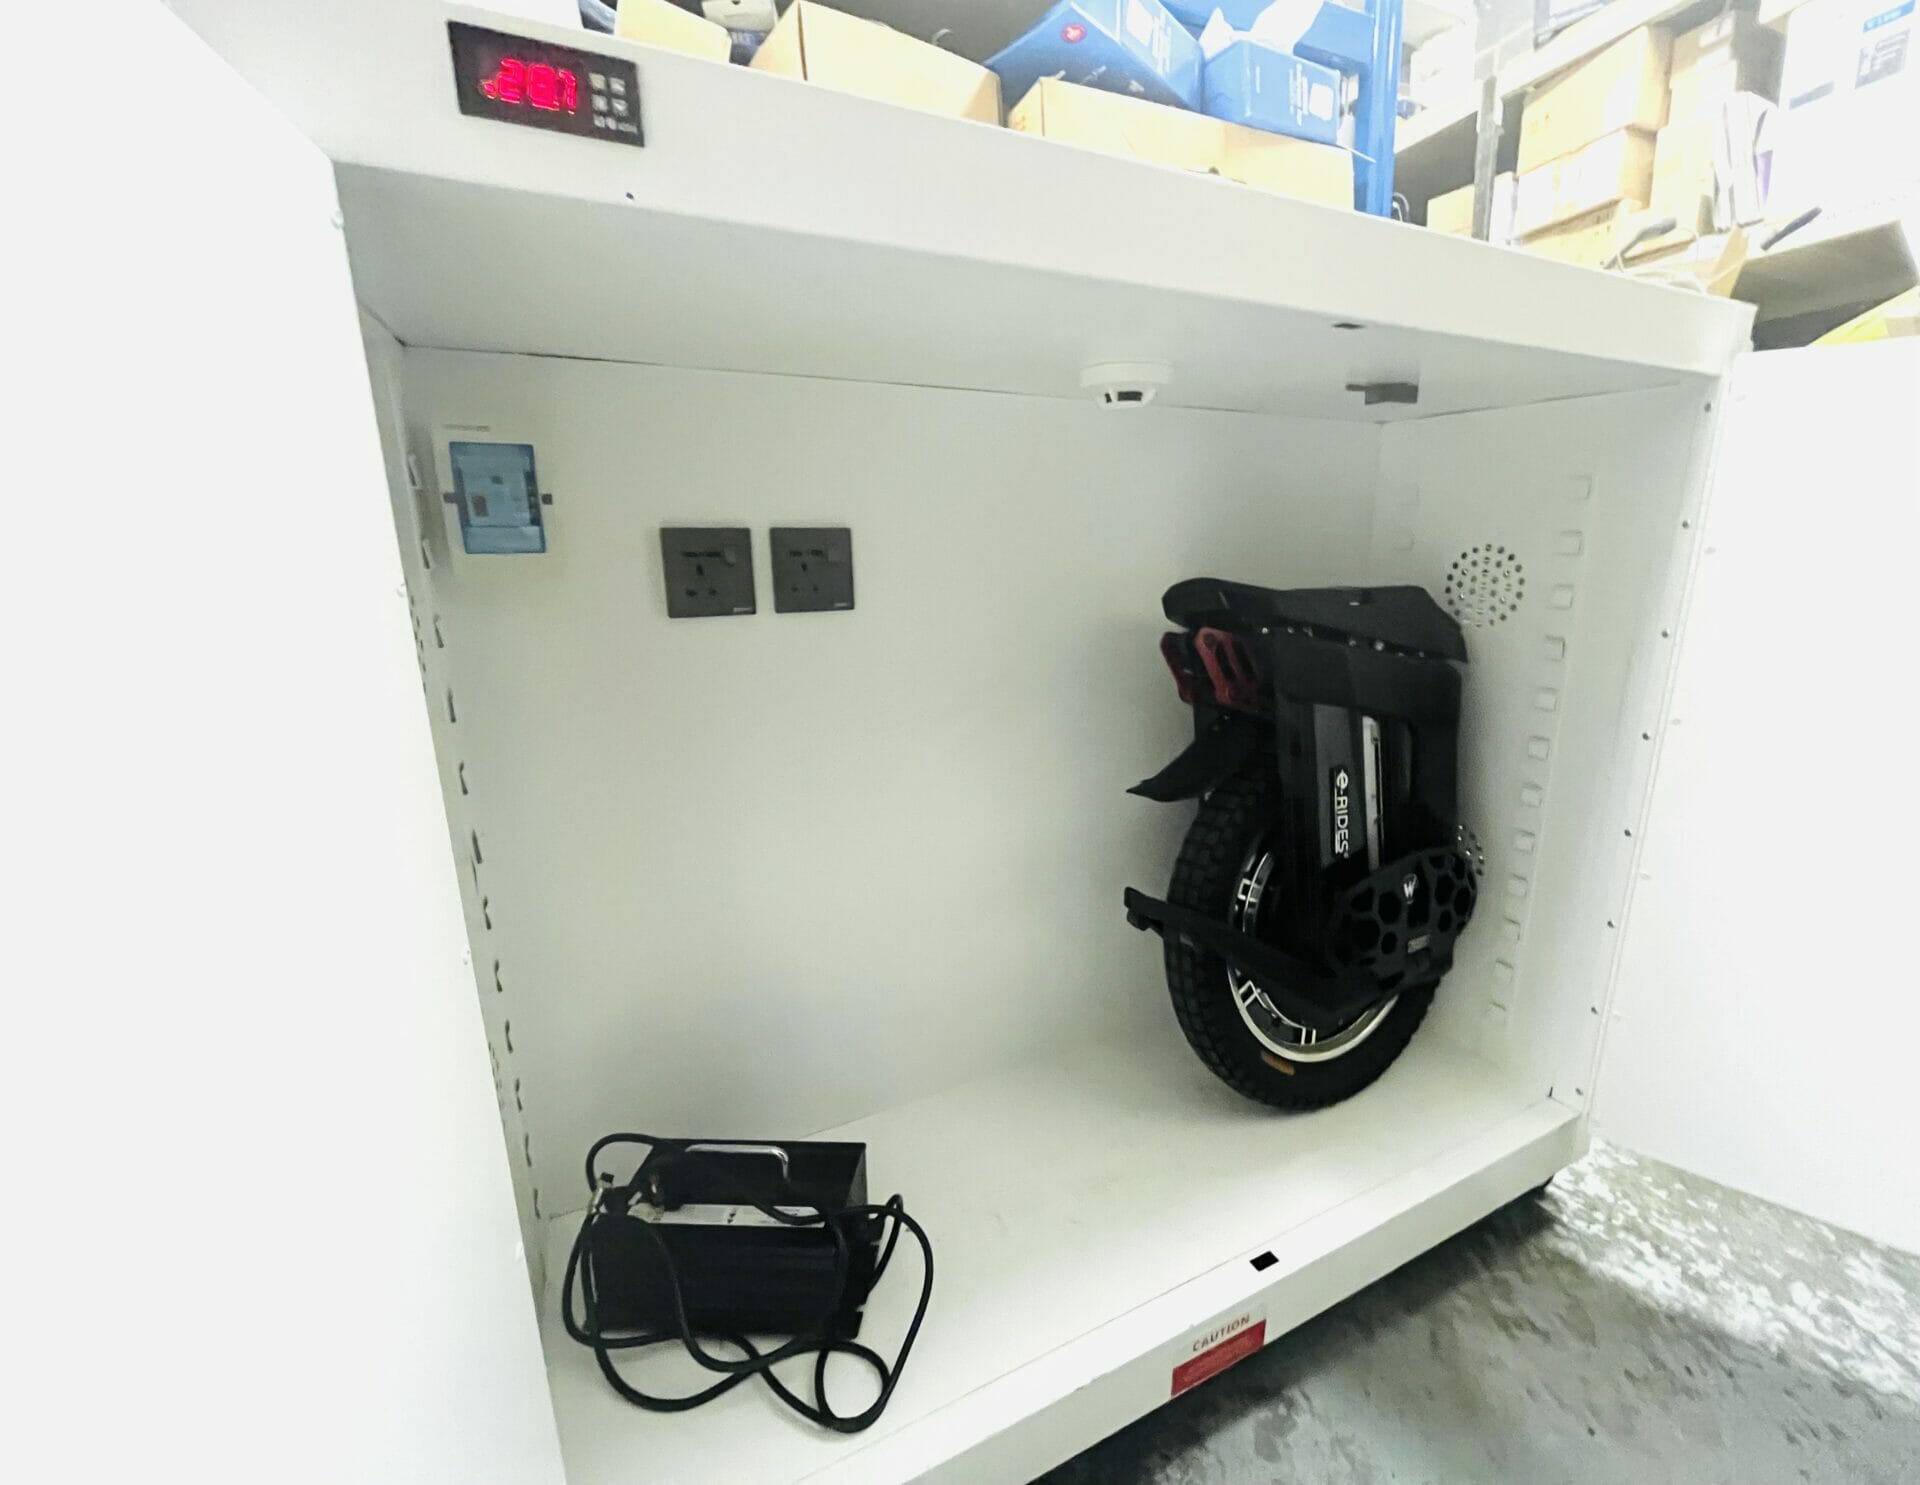 e-RIDES Fire Resistant charging cabinet with doors open